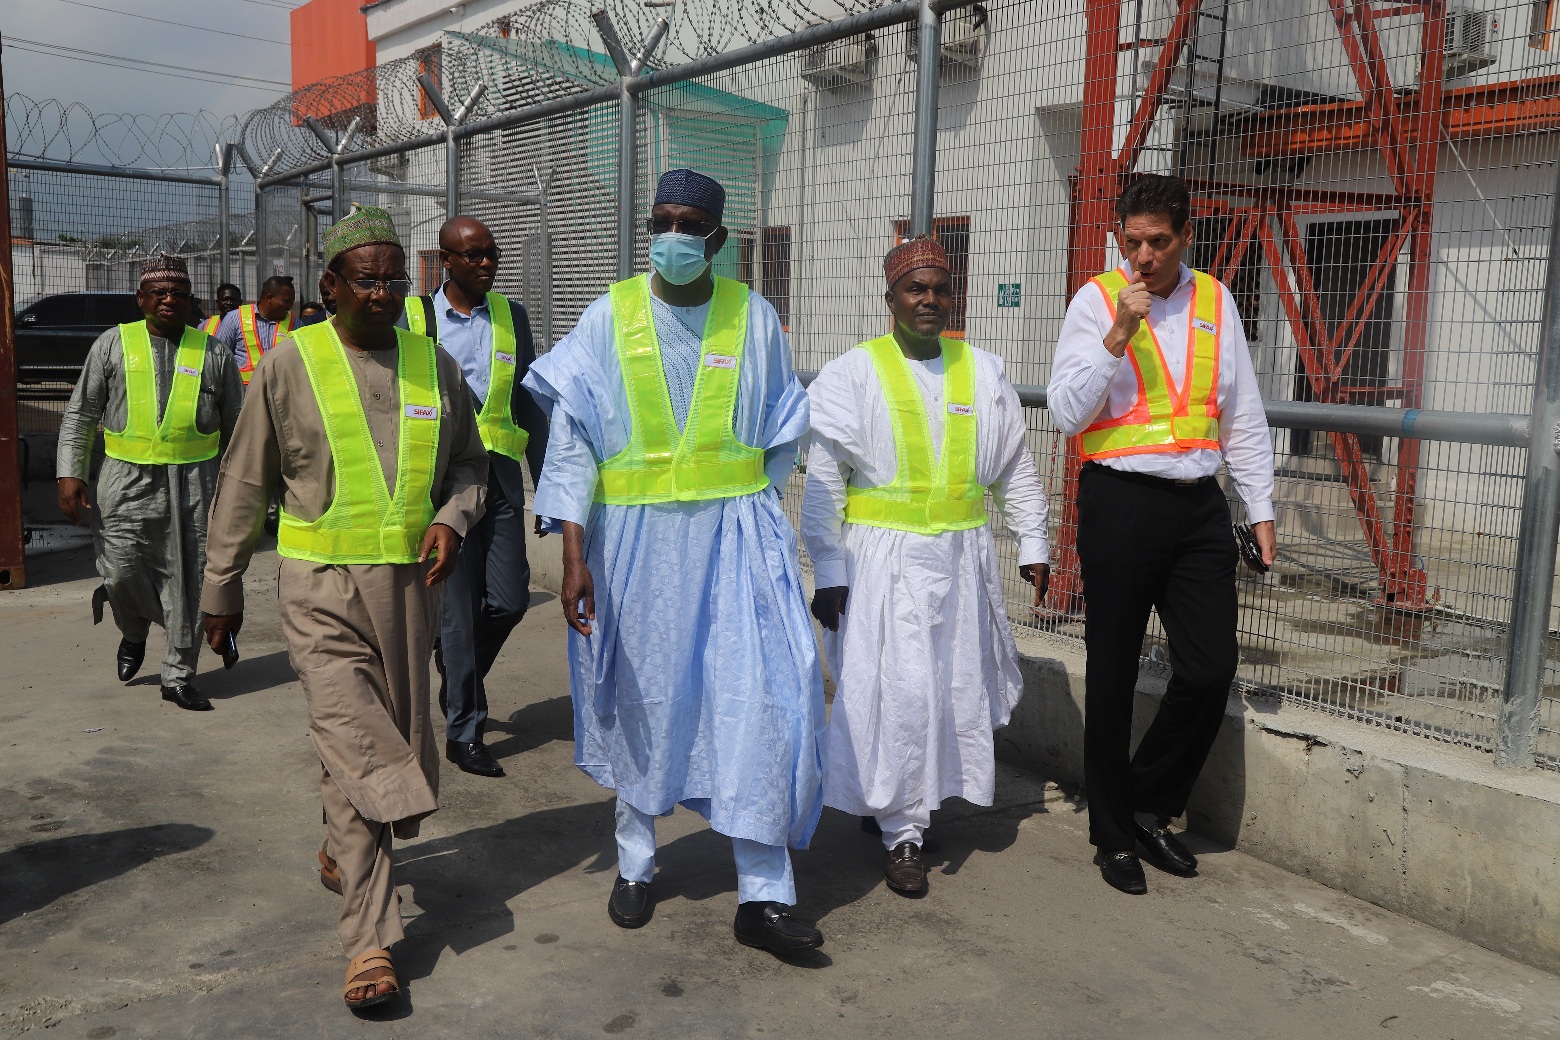 R-L: Paul Linden, Managing Director, SIFAX Container Terminal, Ijora Causeway showing the Dala Dry Port Team from Kano State around the newly-commissioned SIFAX Container Terminal, Ijora Causeway. Others are (from right)- Ahmad Rabiu, Managing Director, Dala Inland Dry Port, Kano State; Abubakar Sahabo Bawuro, Chairman/CEO, Dala Inland Dry Port, Kano State and Yakubu Tsalhatu Jumare, Head of Operations, Dala Inland Dry Port, Kano State.